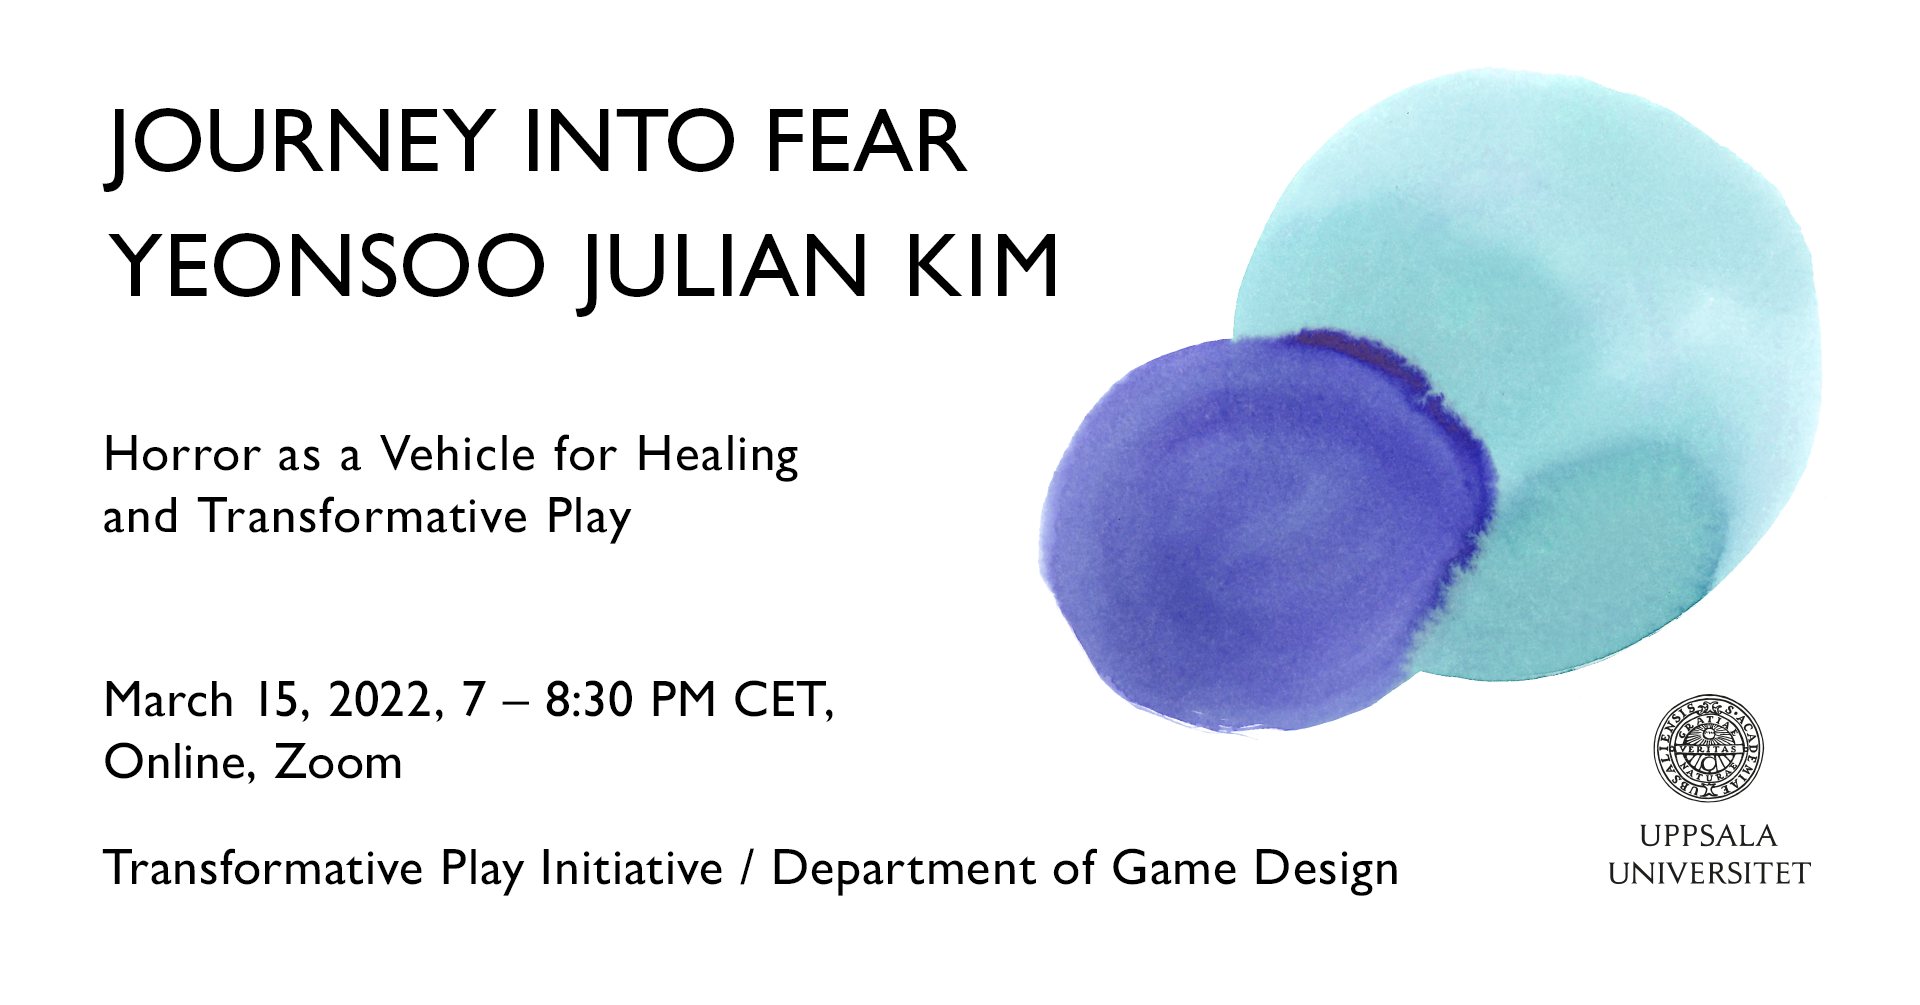 Poster for our next lecture in the Transformative Play Initiative Event Series: "Journey into Fear: Horror as a Vehicle for Healing and Transformative Play” by Yeonsoo Julian Kim!